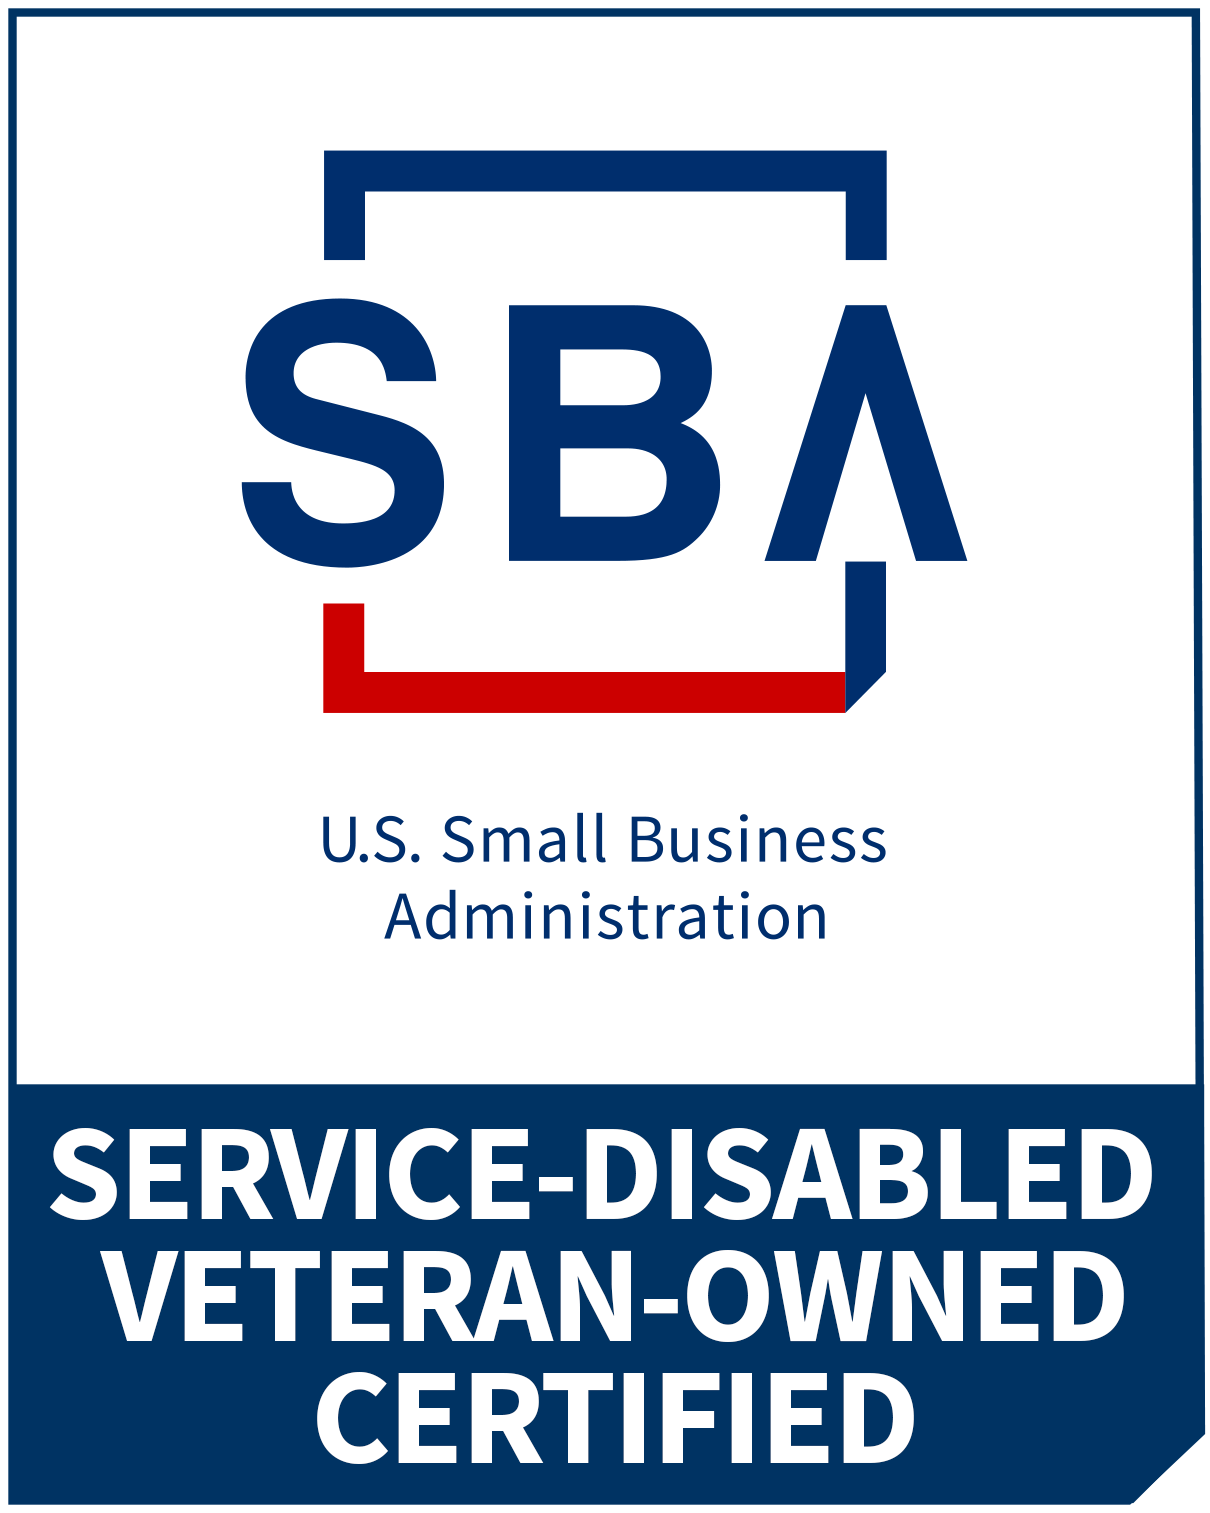 Service-Disabled Veteran-Owned Certified logo